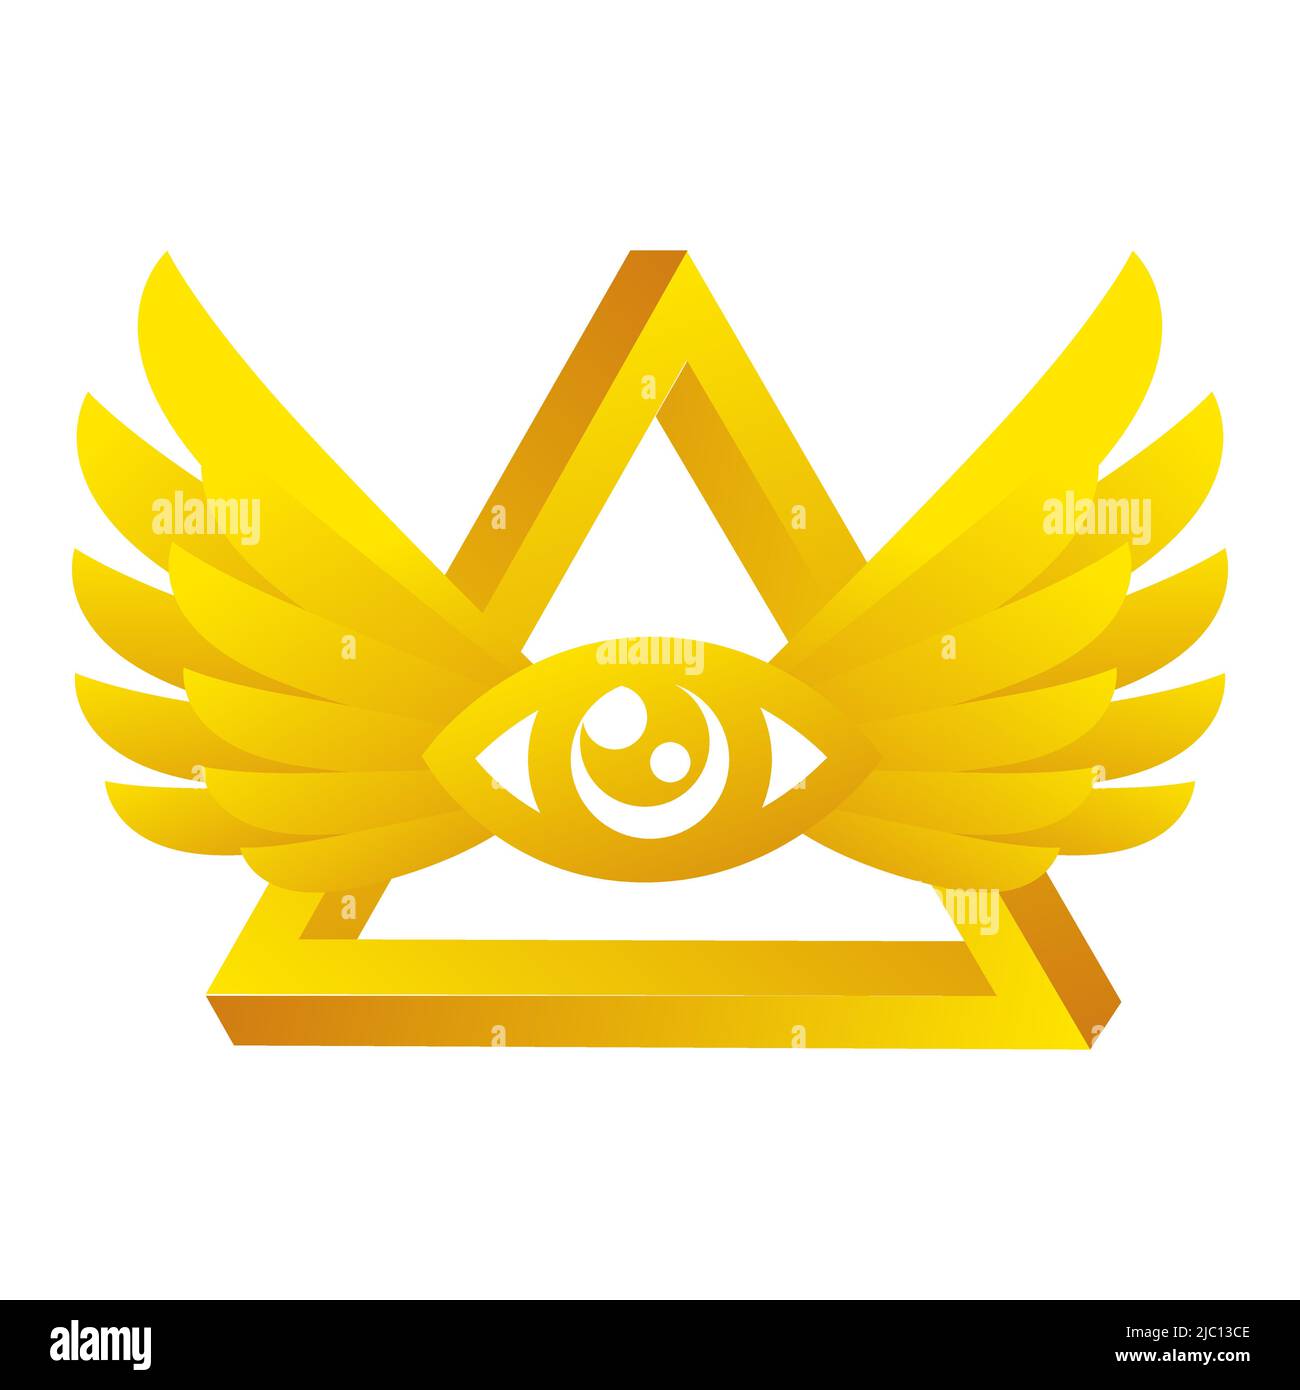 All-seeing eye with wings. Golden Pyramid, Masonic Symbol Stock Vector